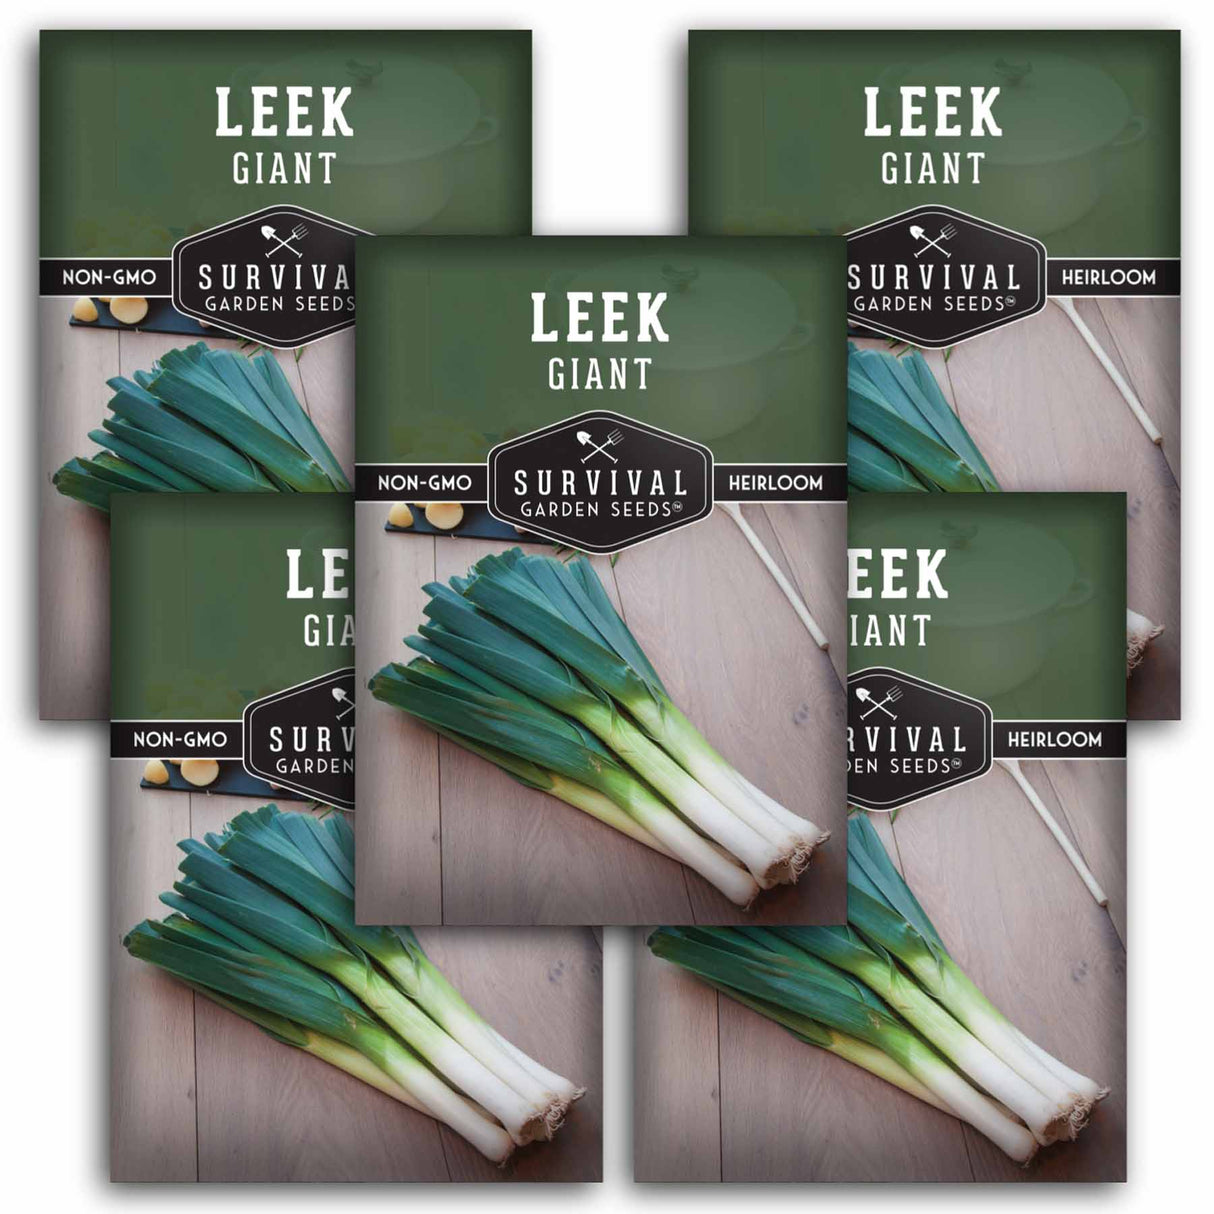 5 packets of Giant Leek seeds